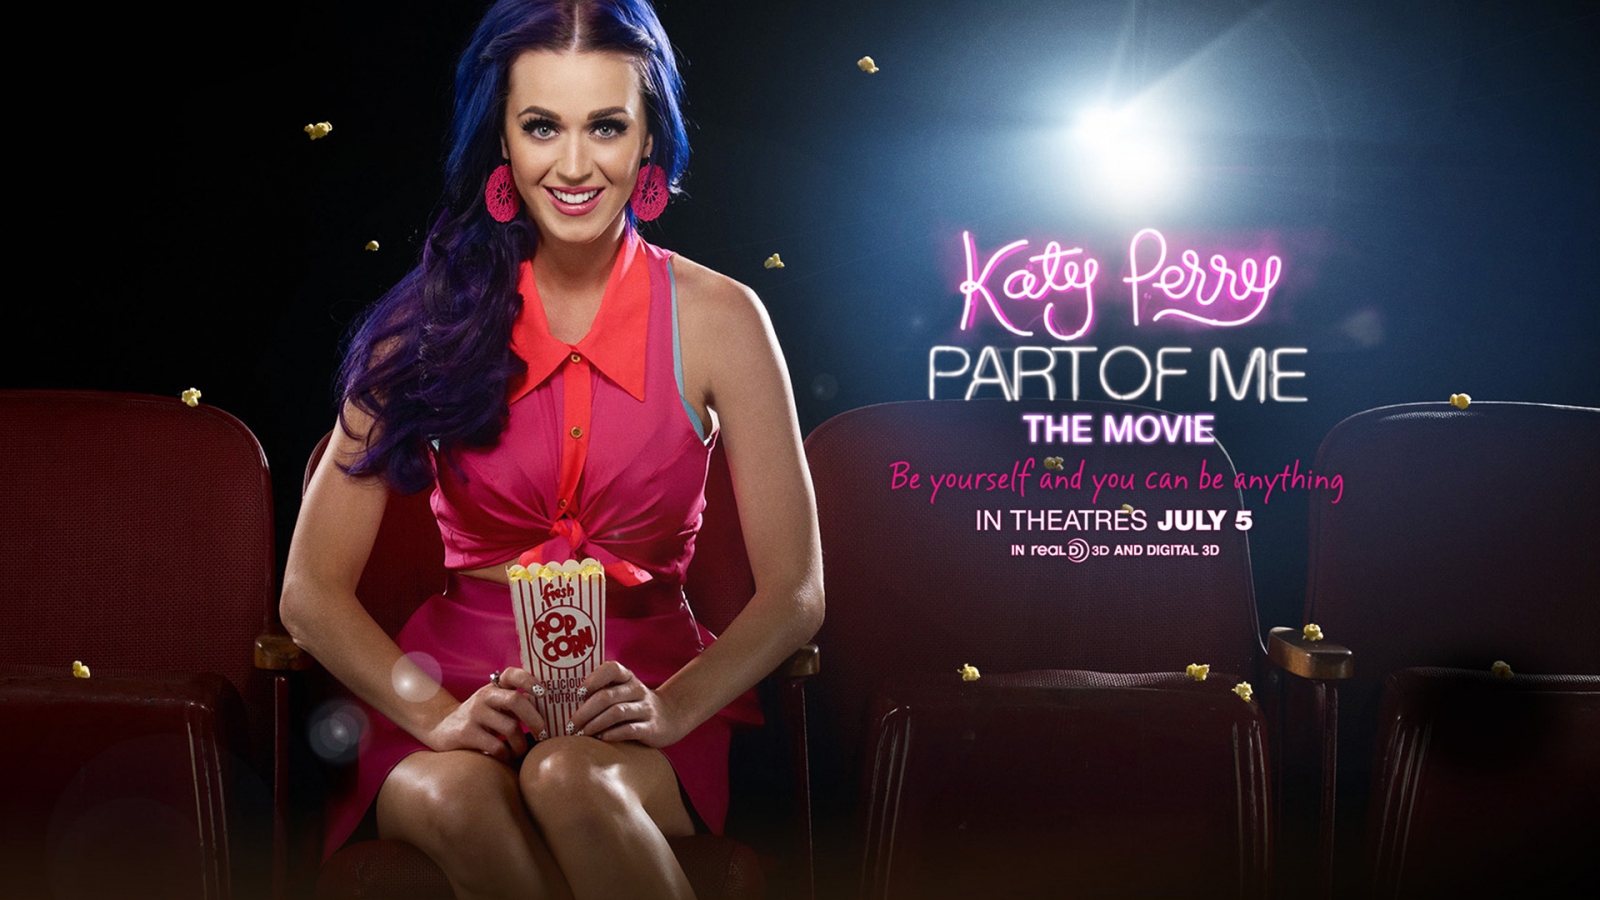 Katy Perry Part Of Me Movie 2012 for 1600 x 900 HDTV resolution